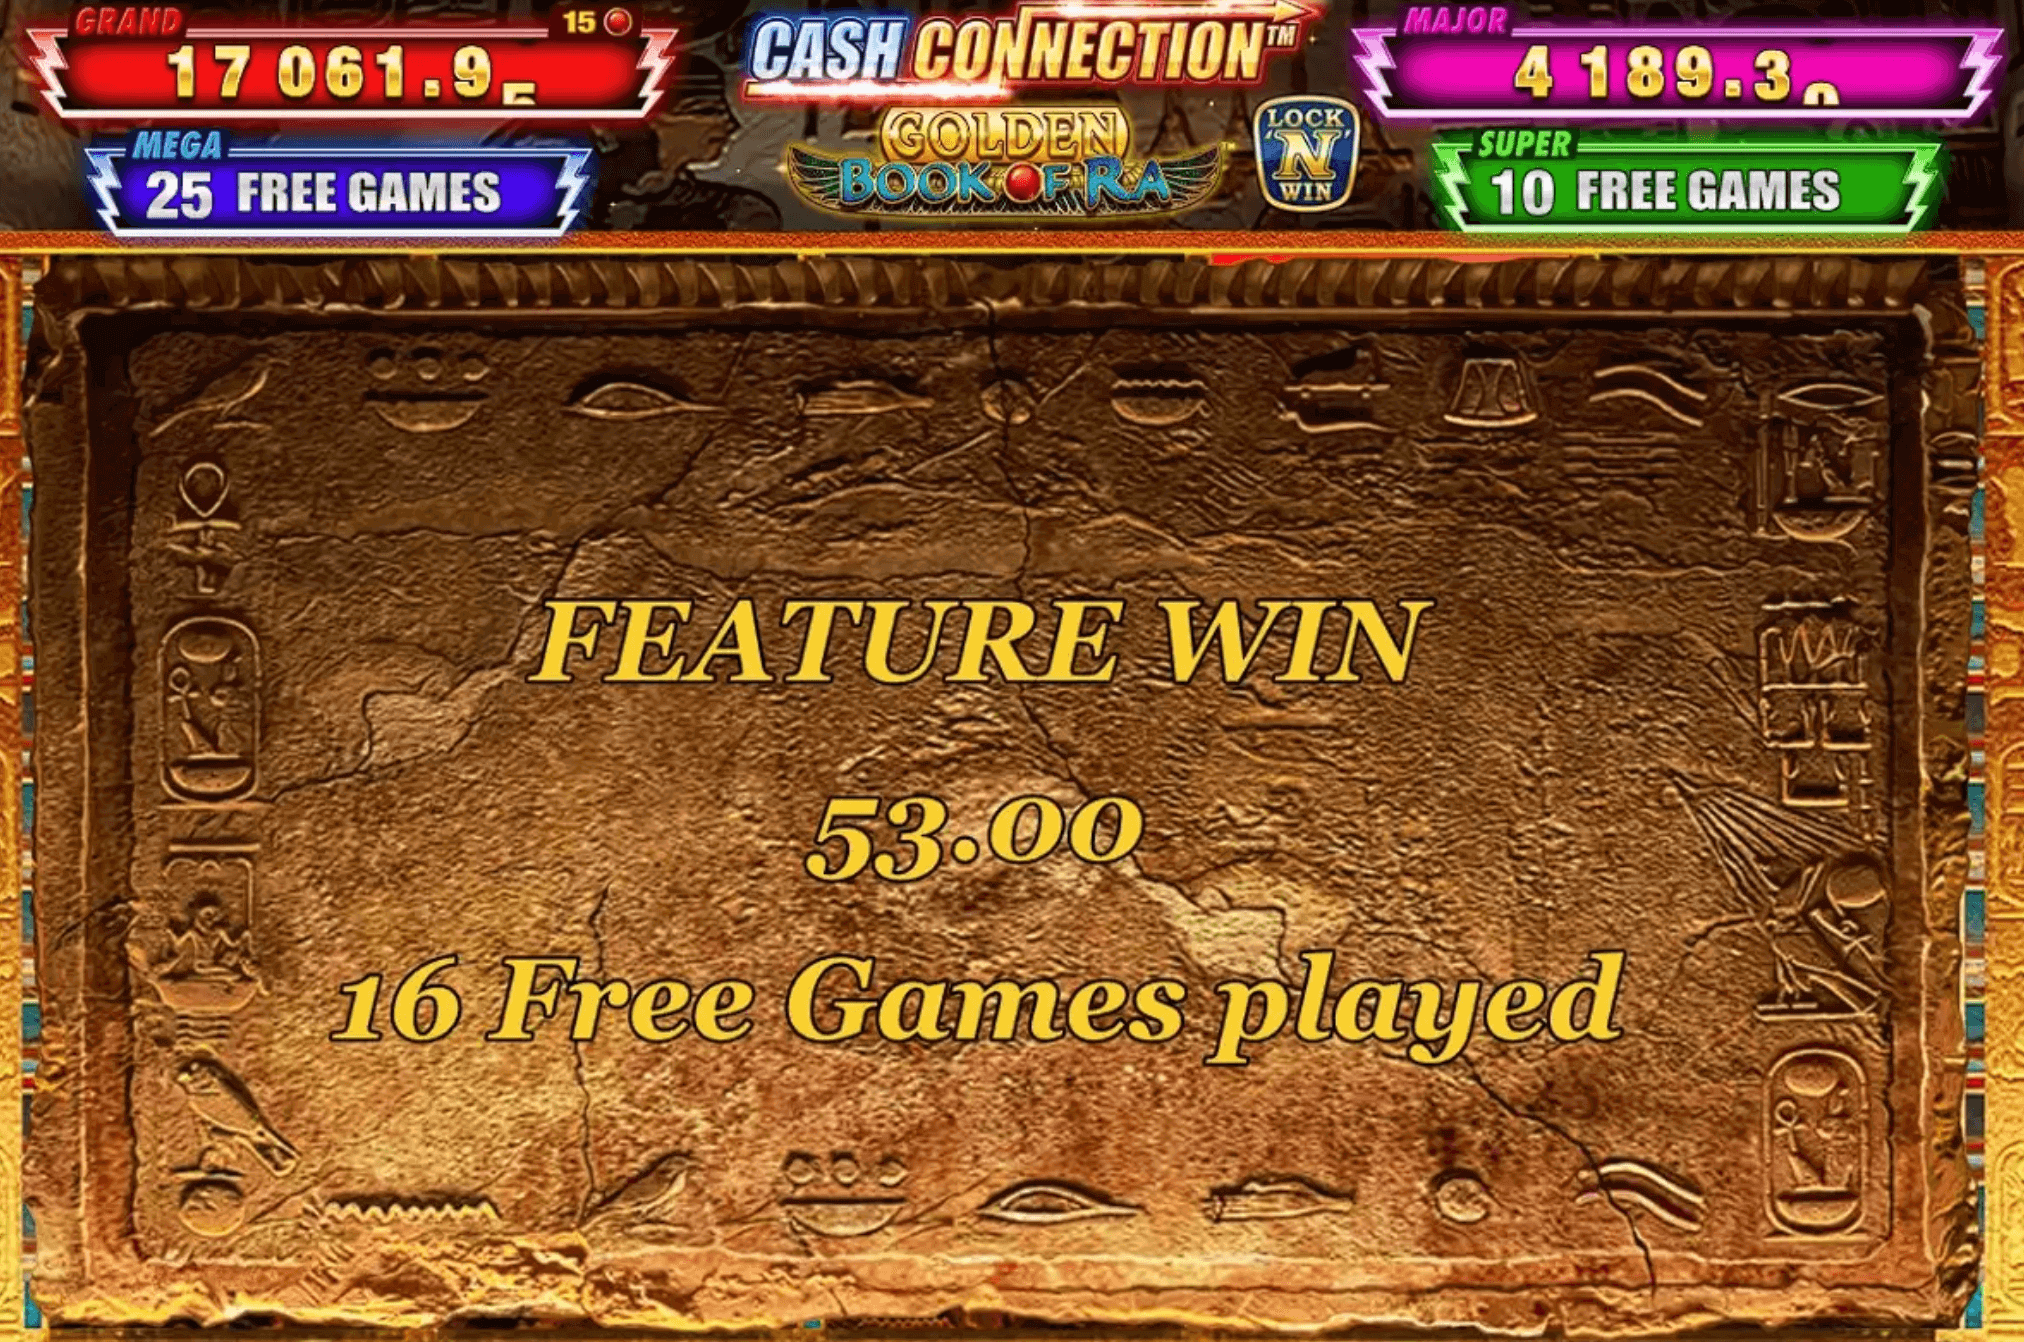 review del slot Cash Connection - Golden Book of Ra